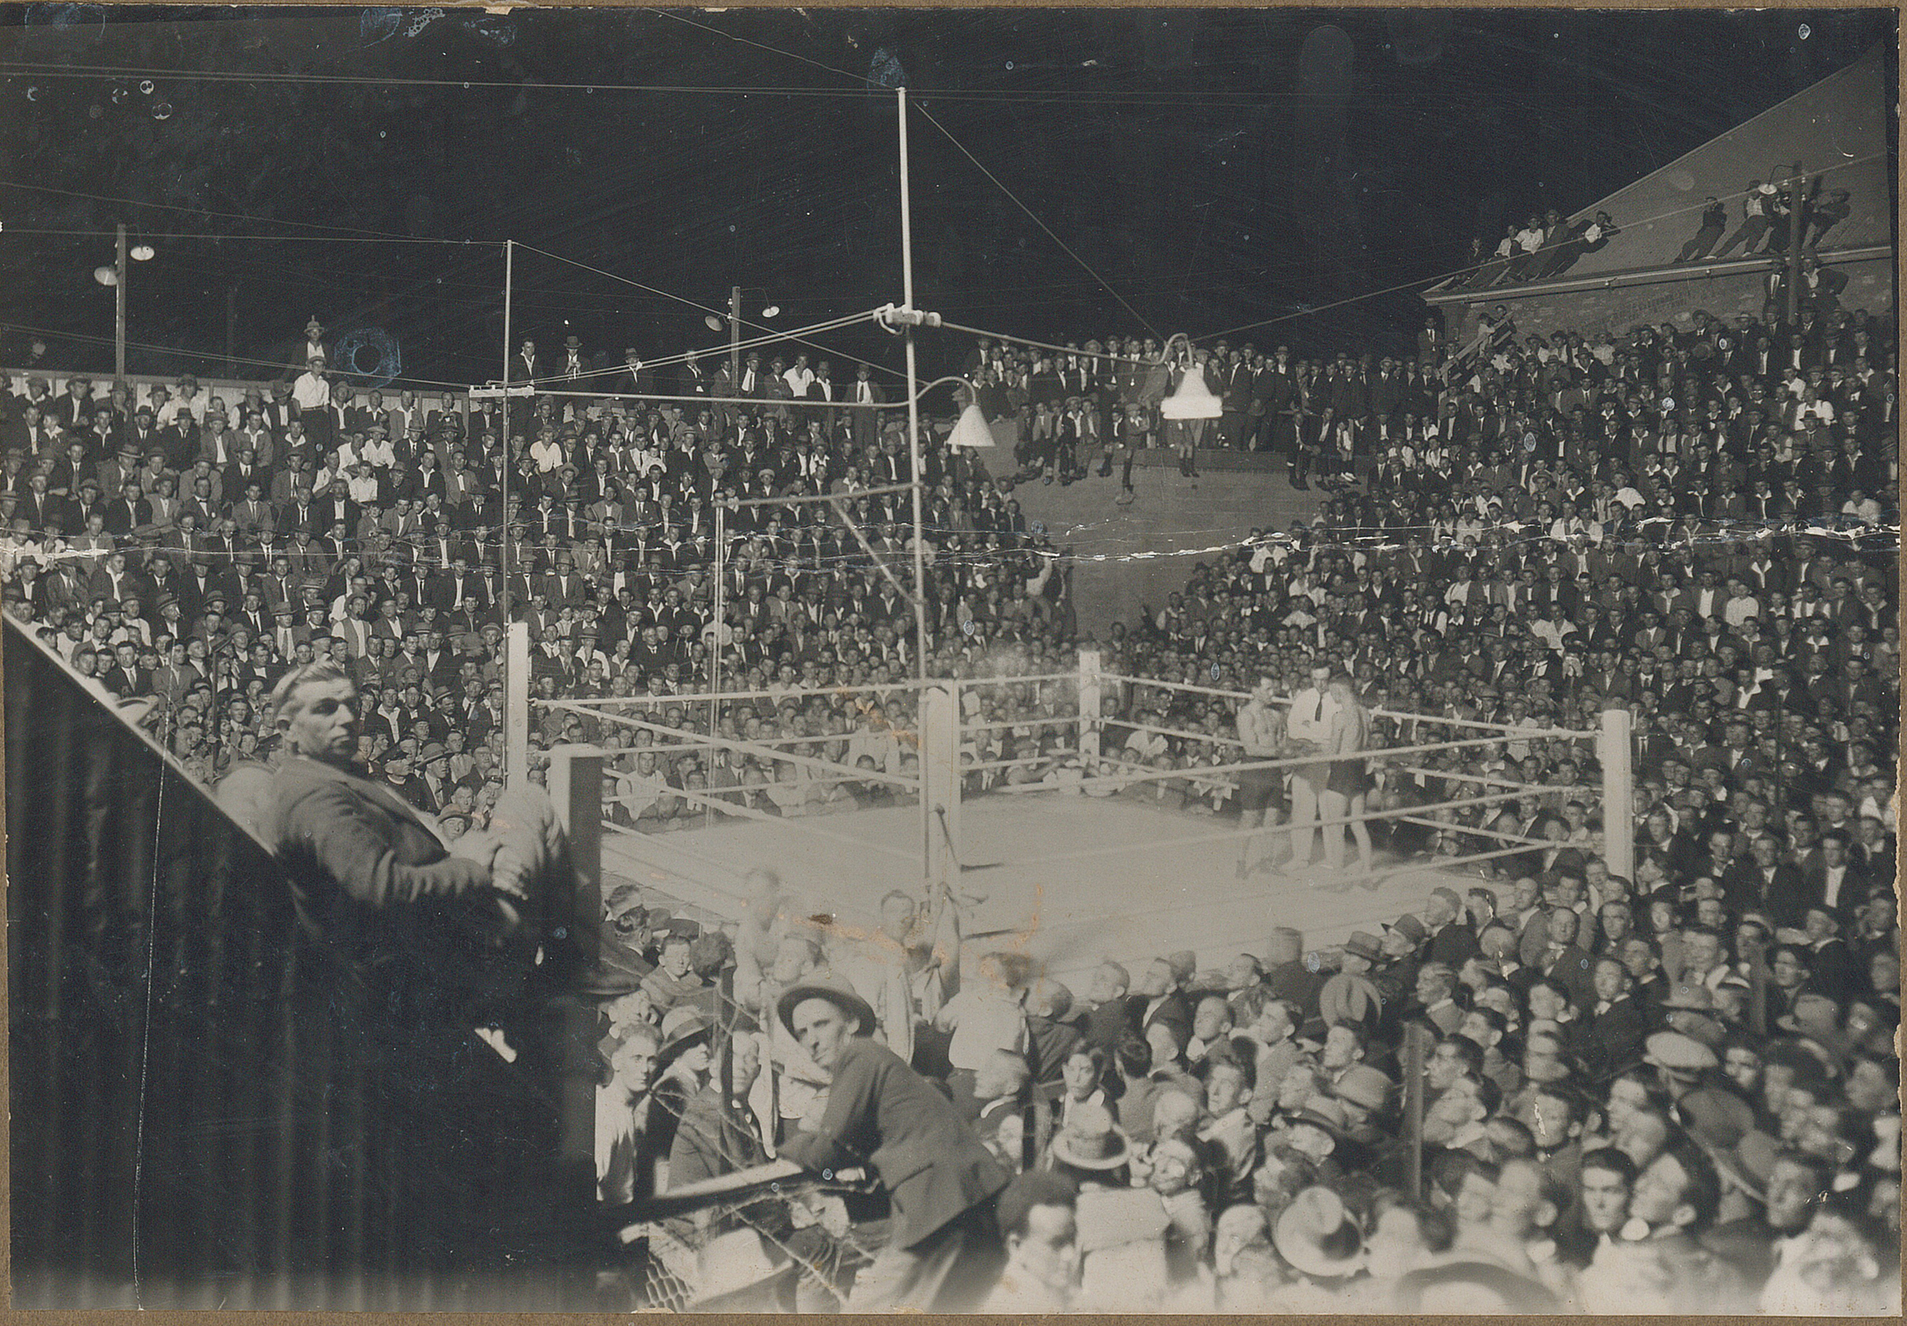 Boxing Stadium behind the Trades Hall in 1930 surround by crowd